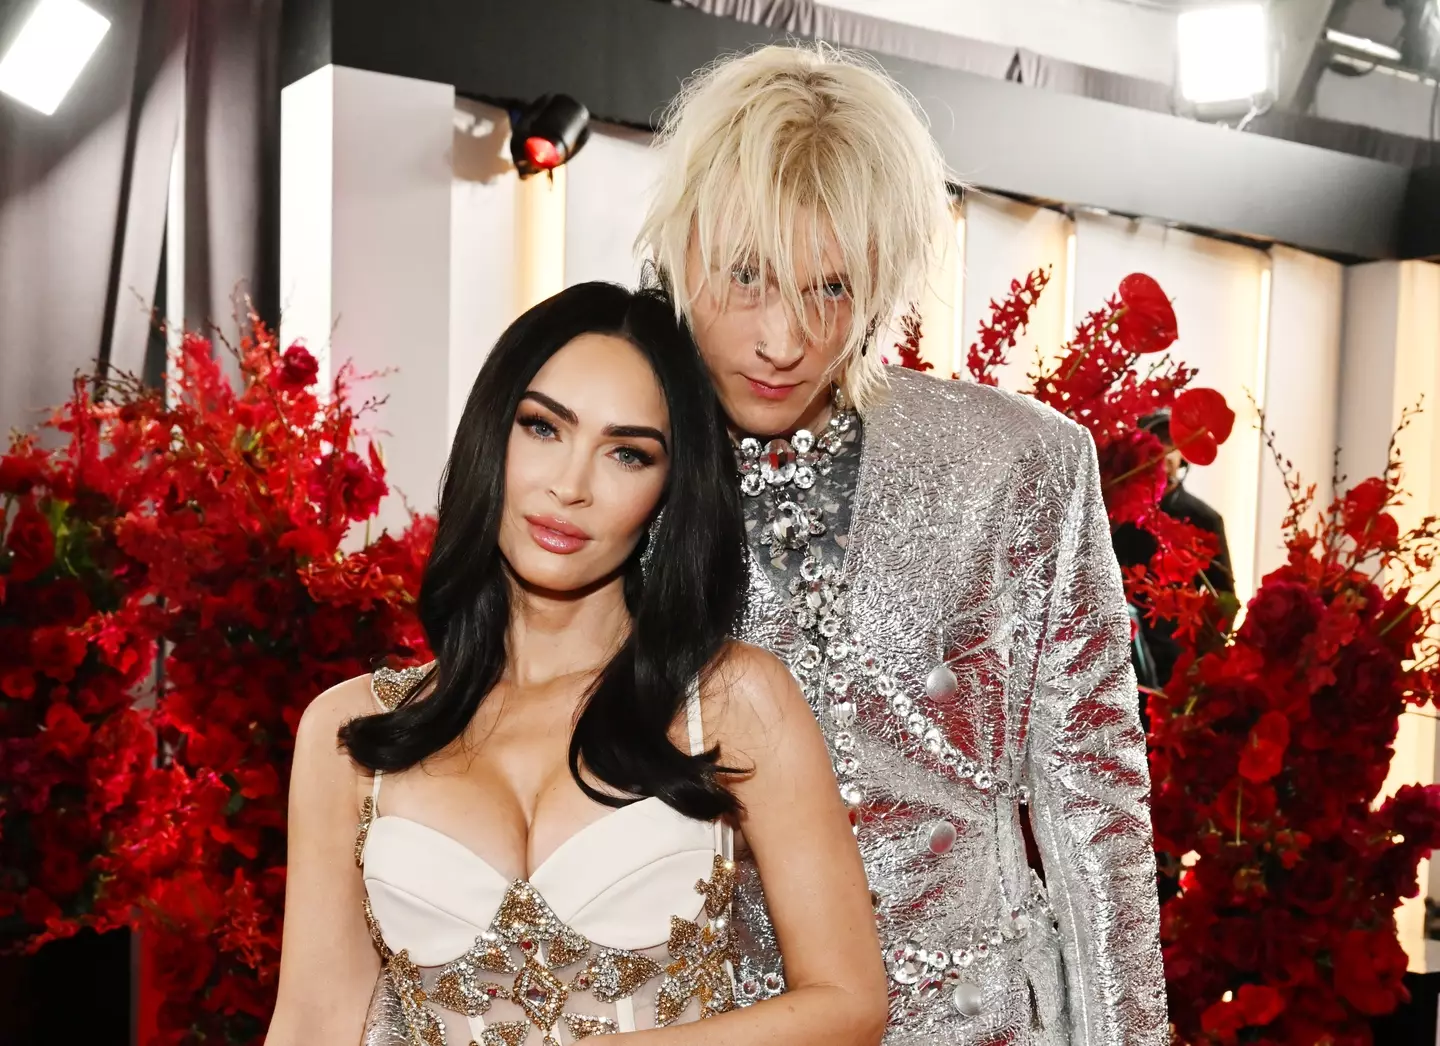 The Tranformers star opened up about her relationship with MGK.